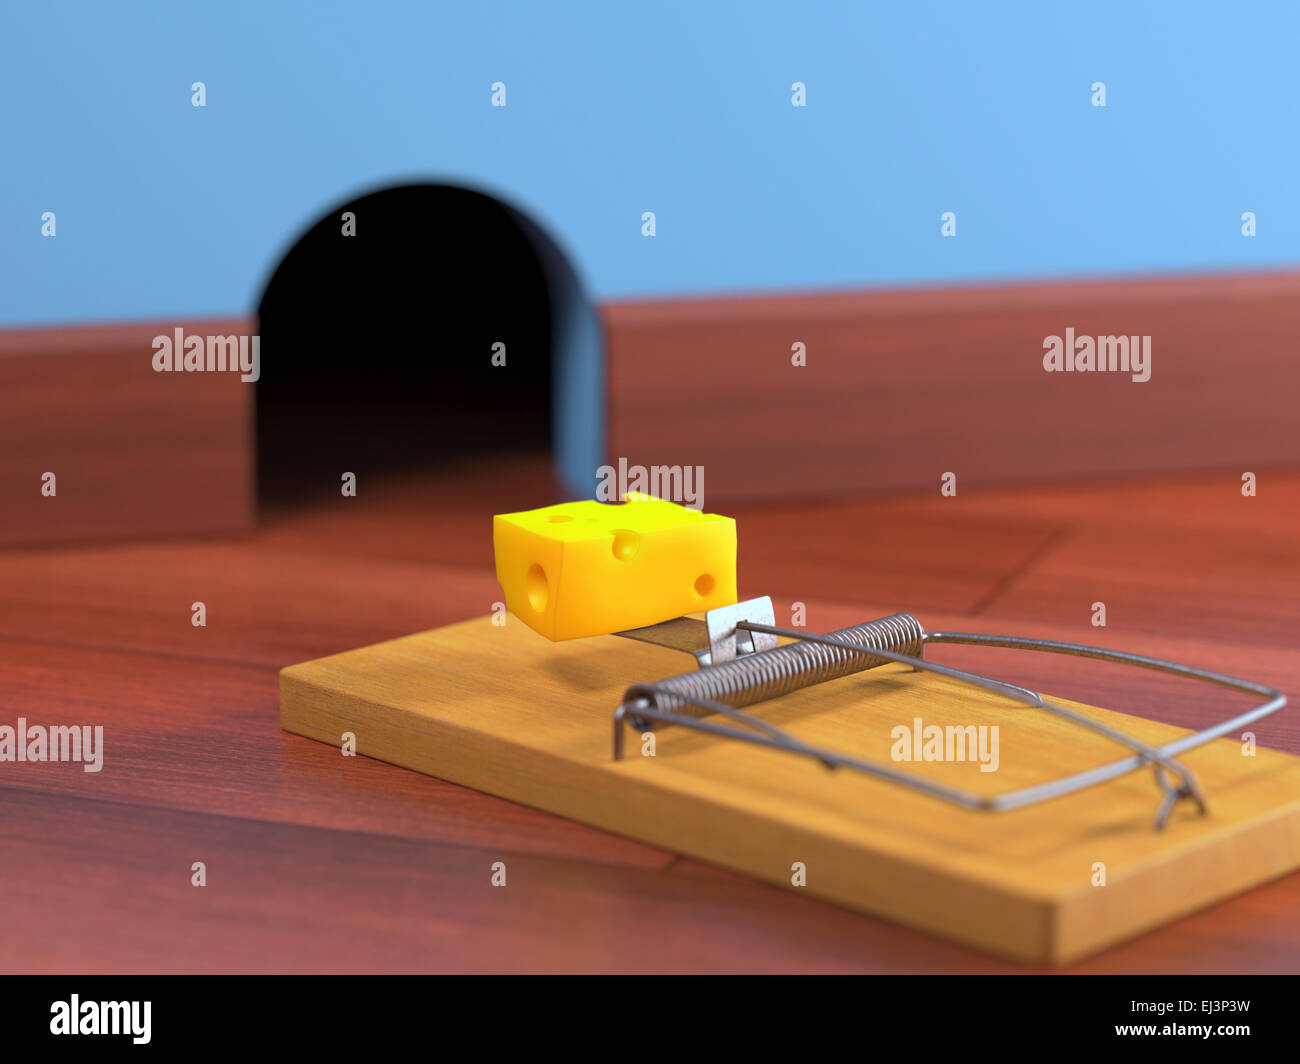 Mouse Trap Hotel - The Cutting Room Floor